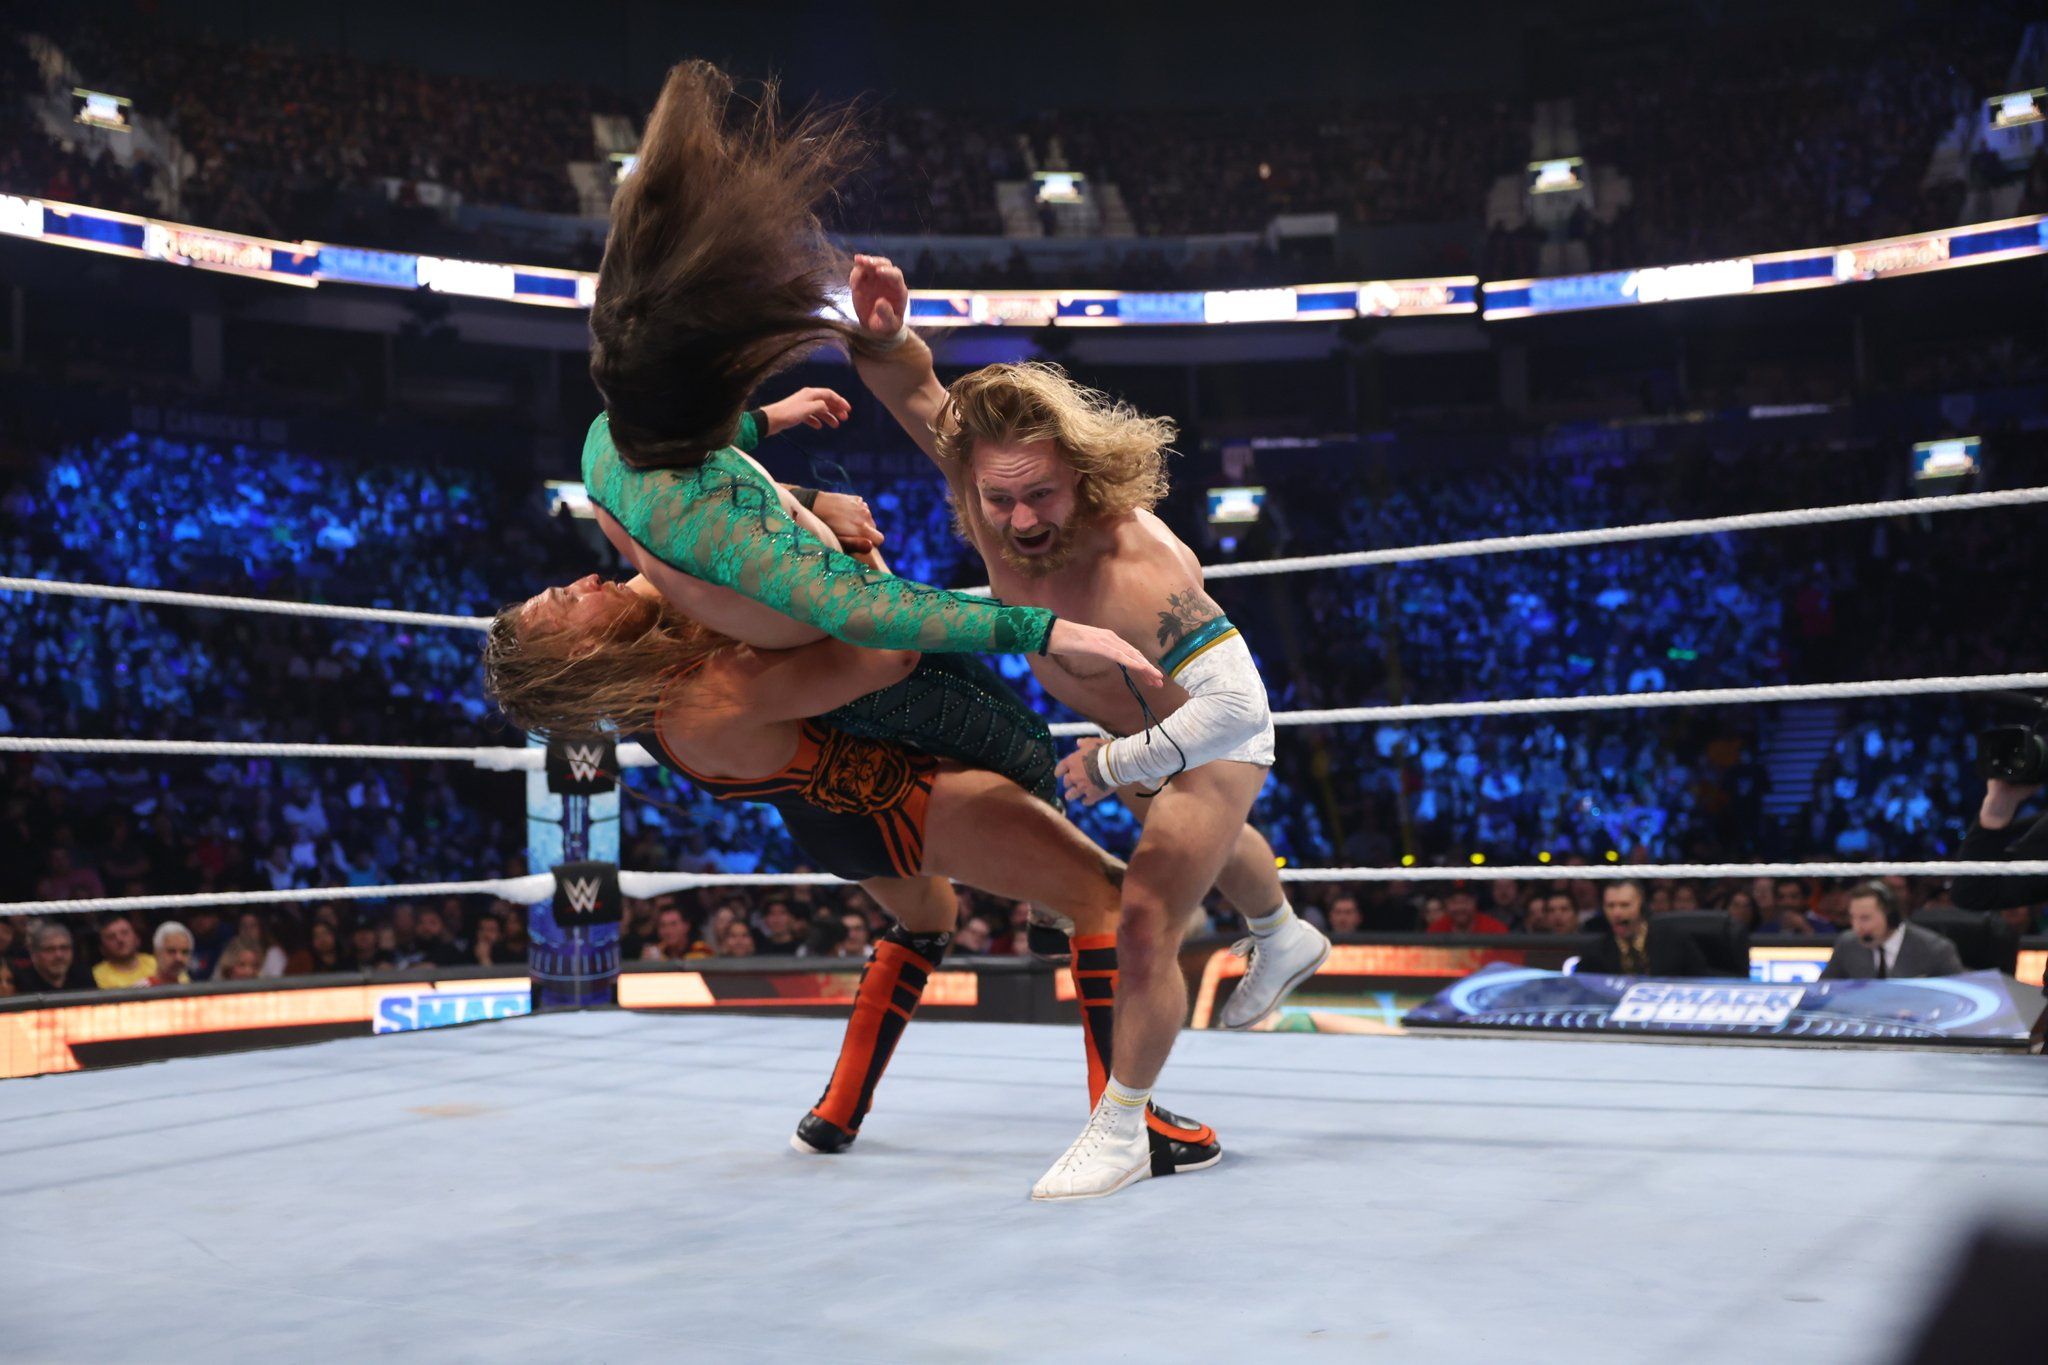 Bate and Dunne's partnership has flourished, and now it's in front of big audiences. (WWE)